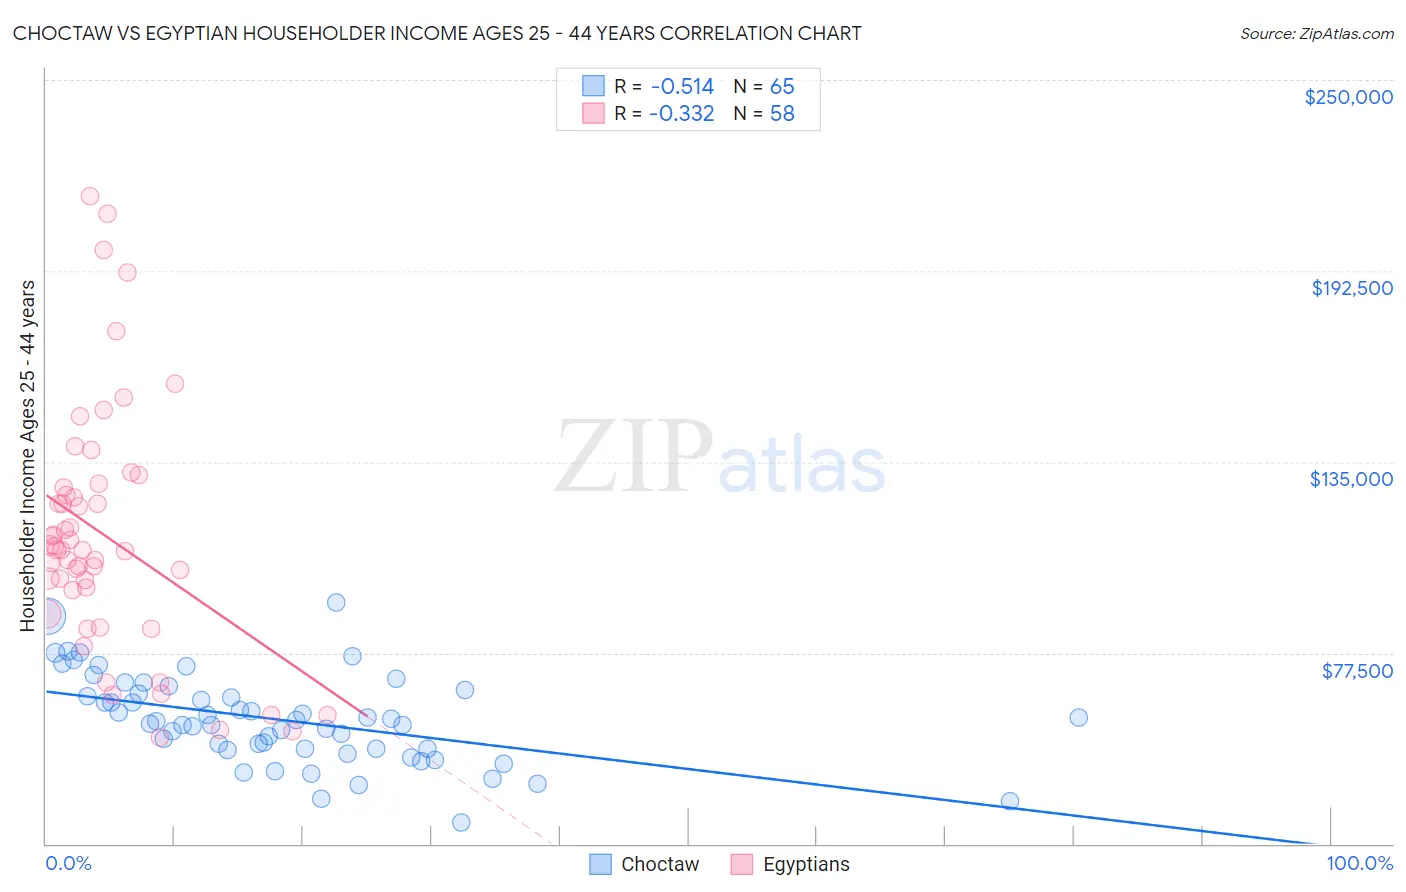 Choctaw vs Egyptian Householder Income Ages 25 - 44 years